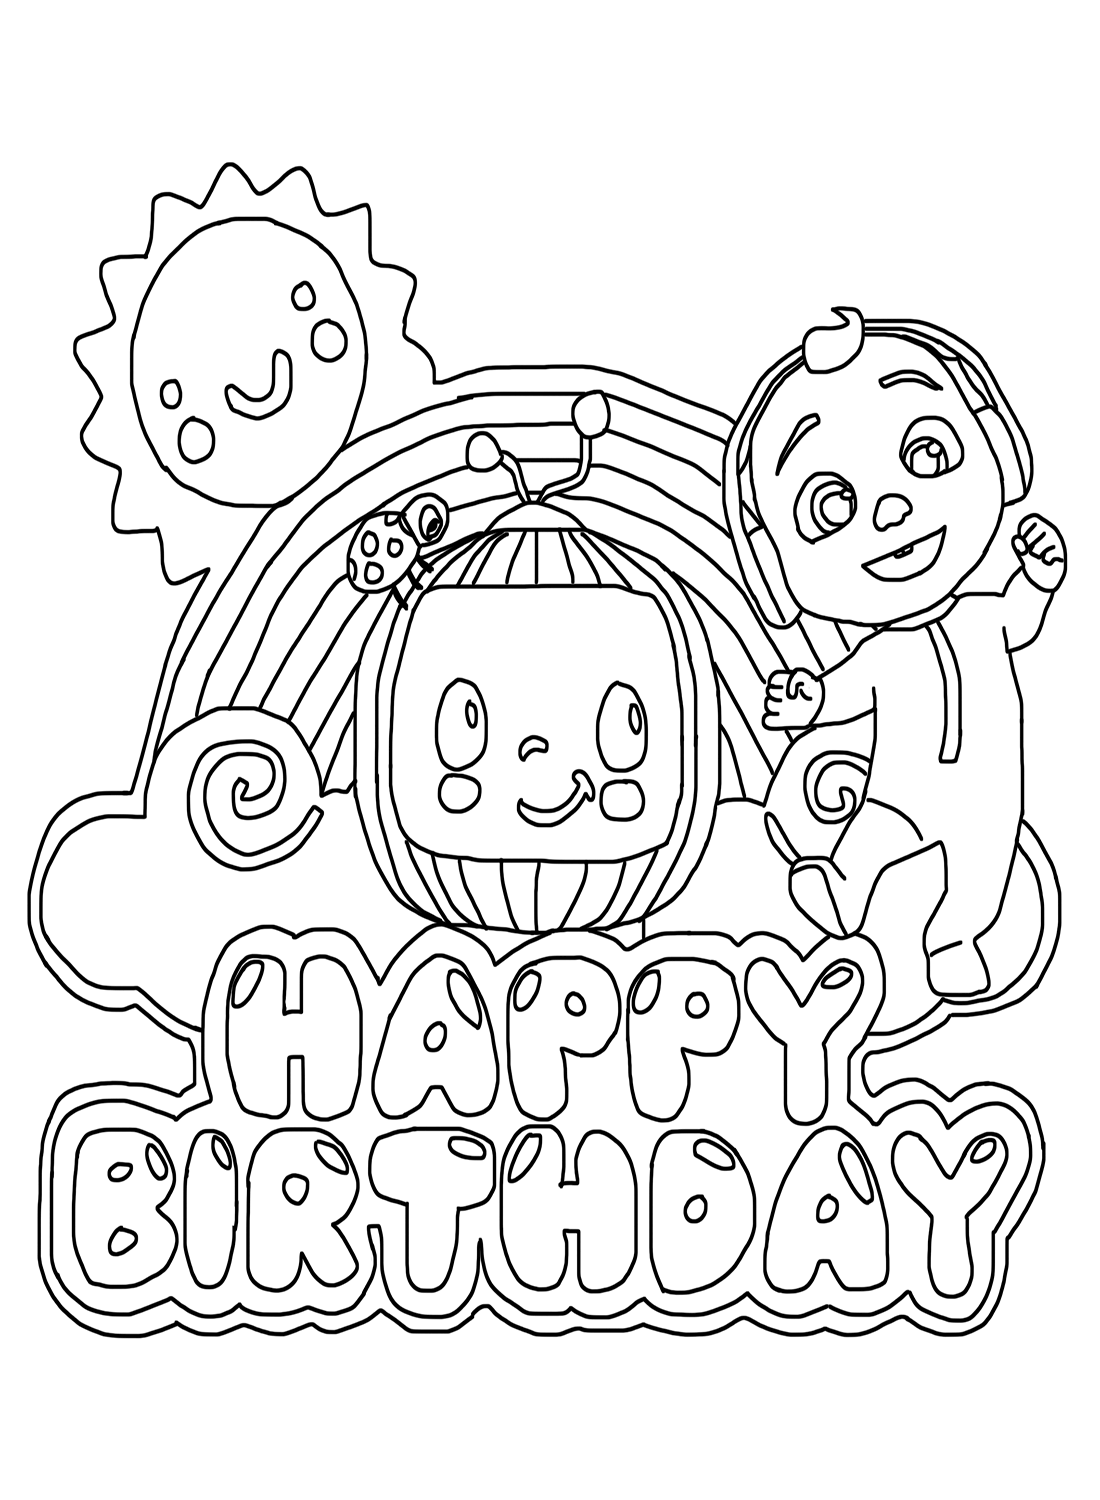 Happy Birthday Cocomelon Coloring Pages Free Printable Coloring Pages